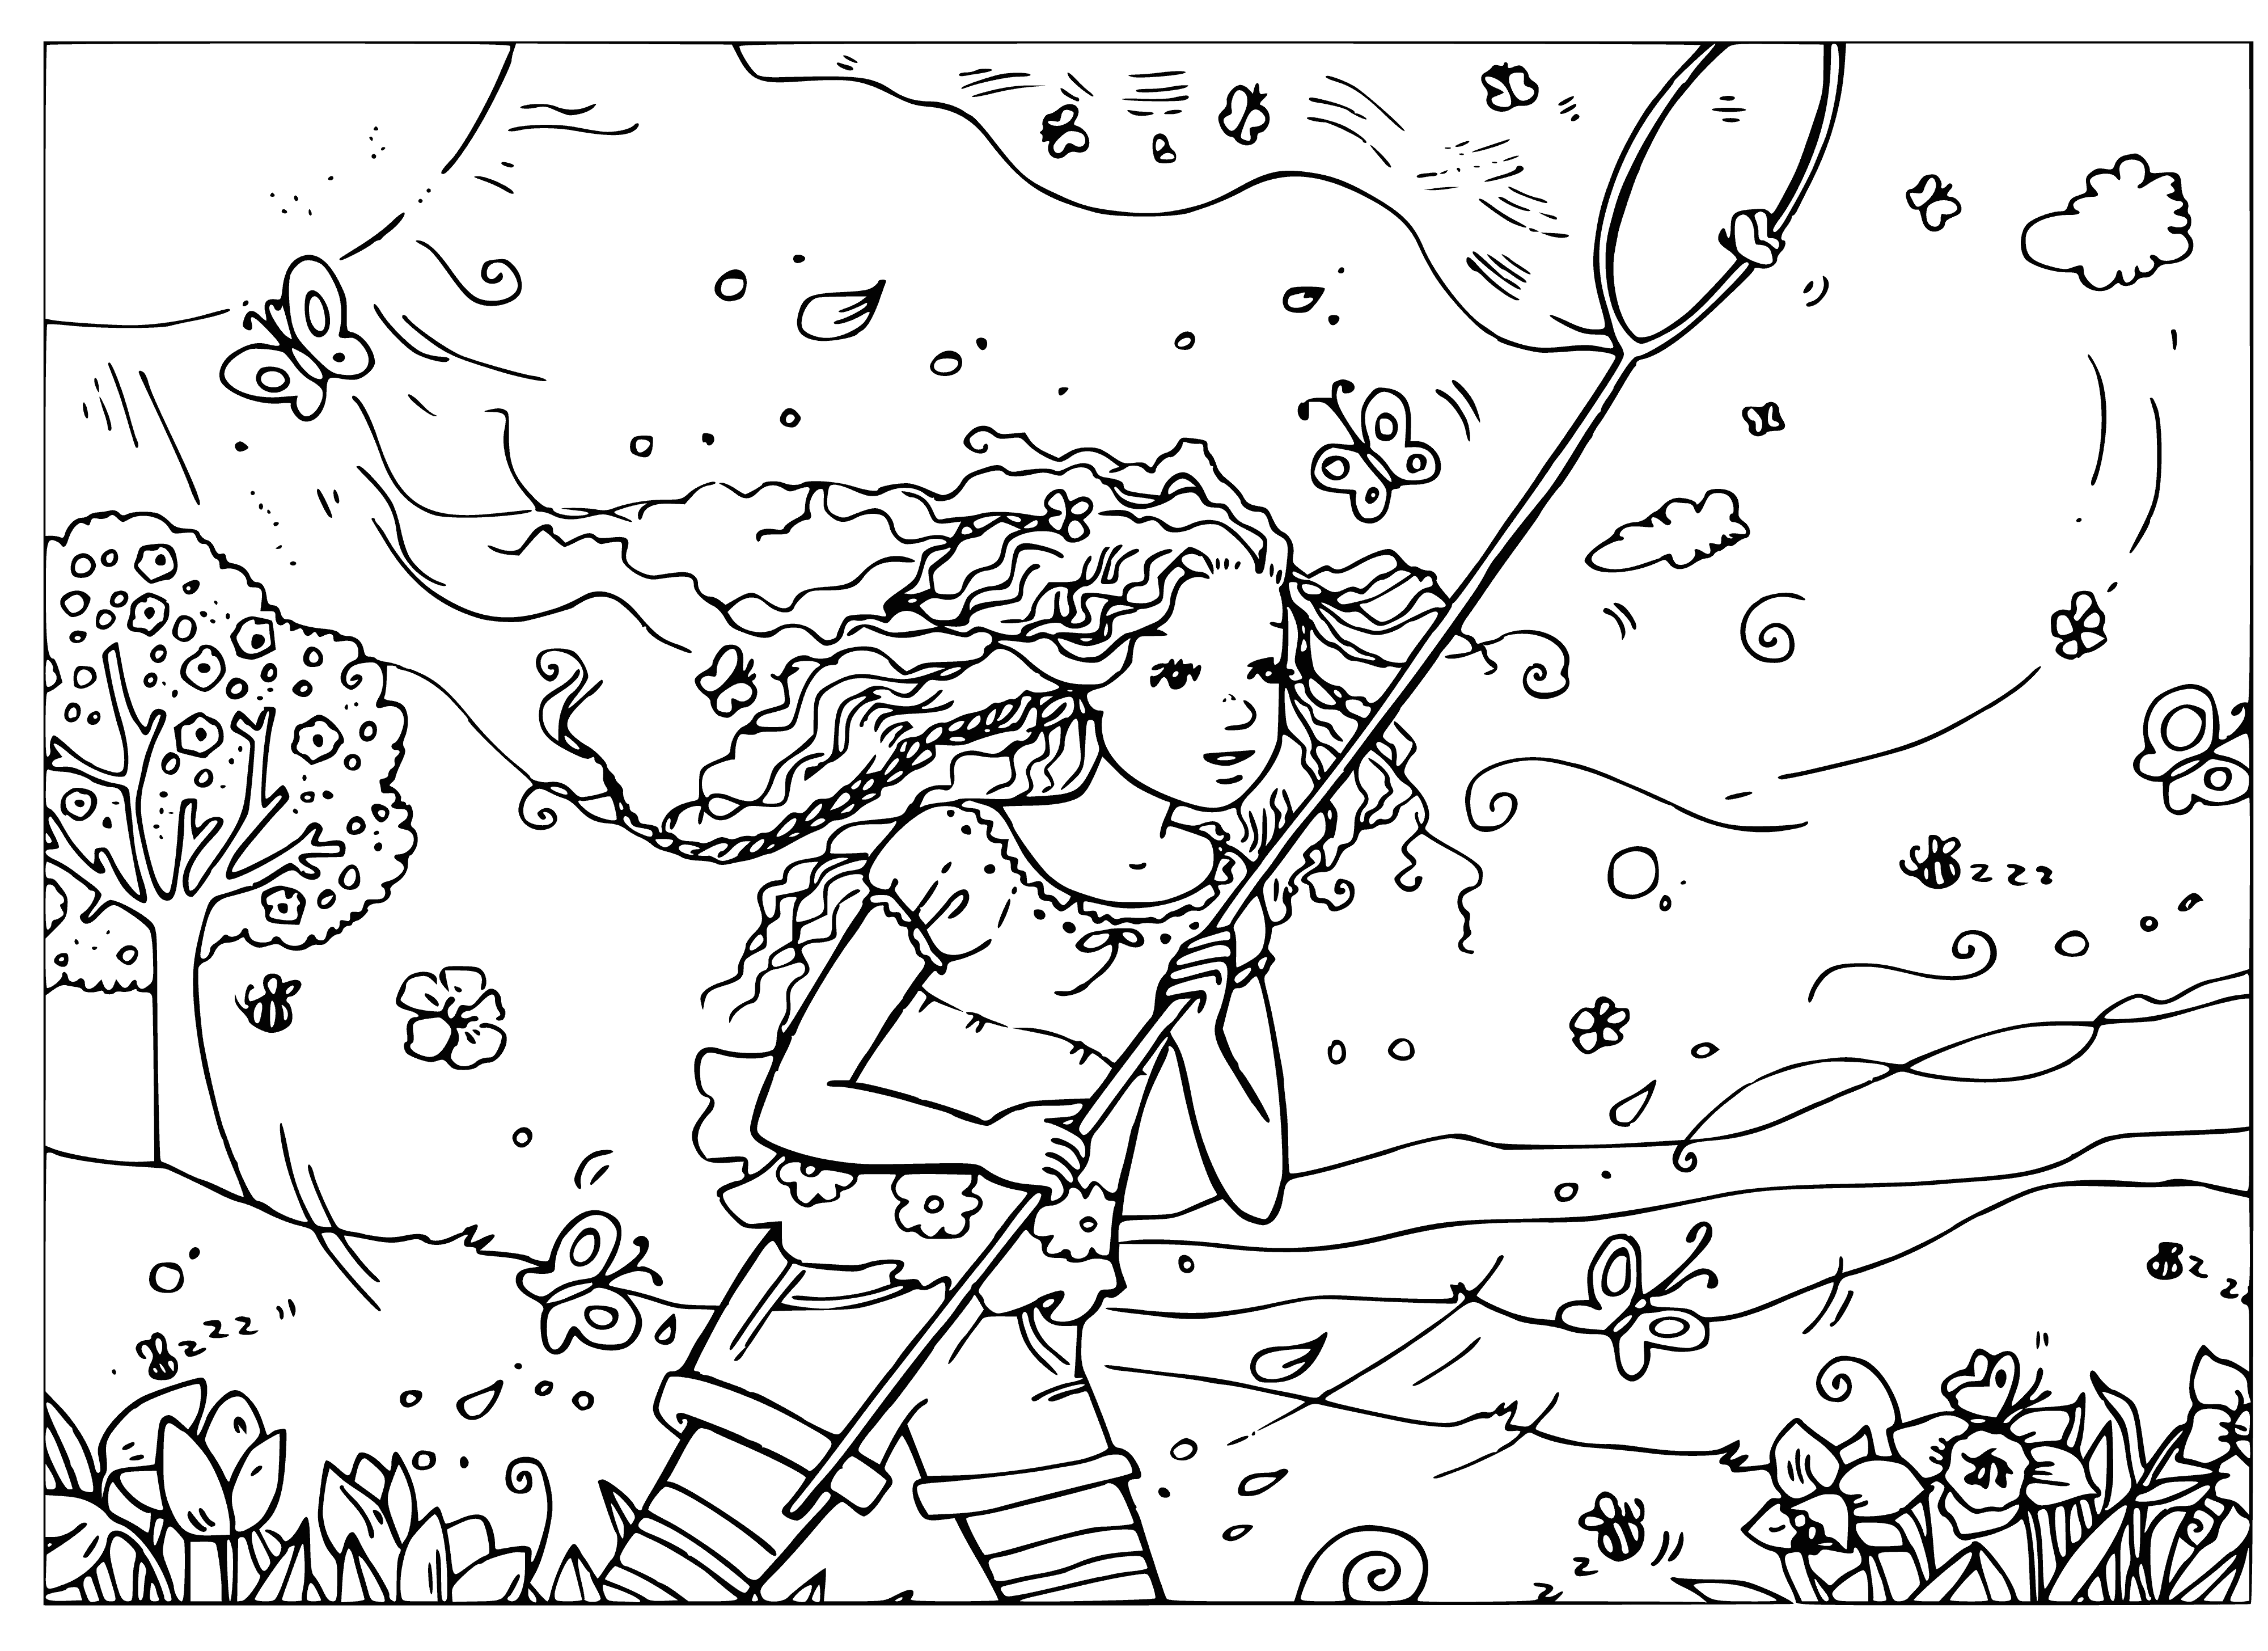 coloring page: Girl in sunhat enjoying meadow flowers with butterfly on her finger in Summer coloring page.